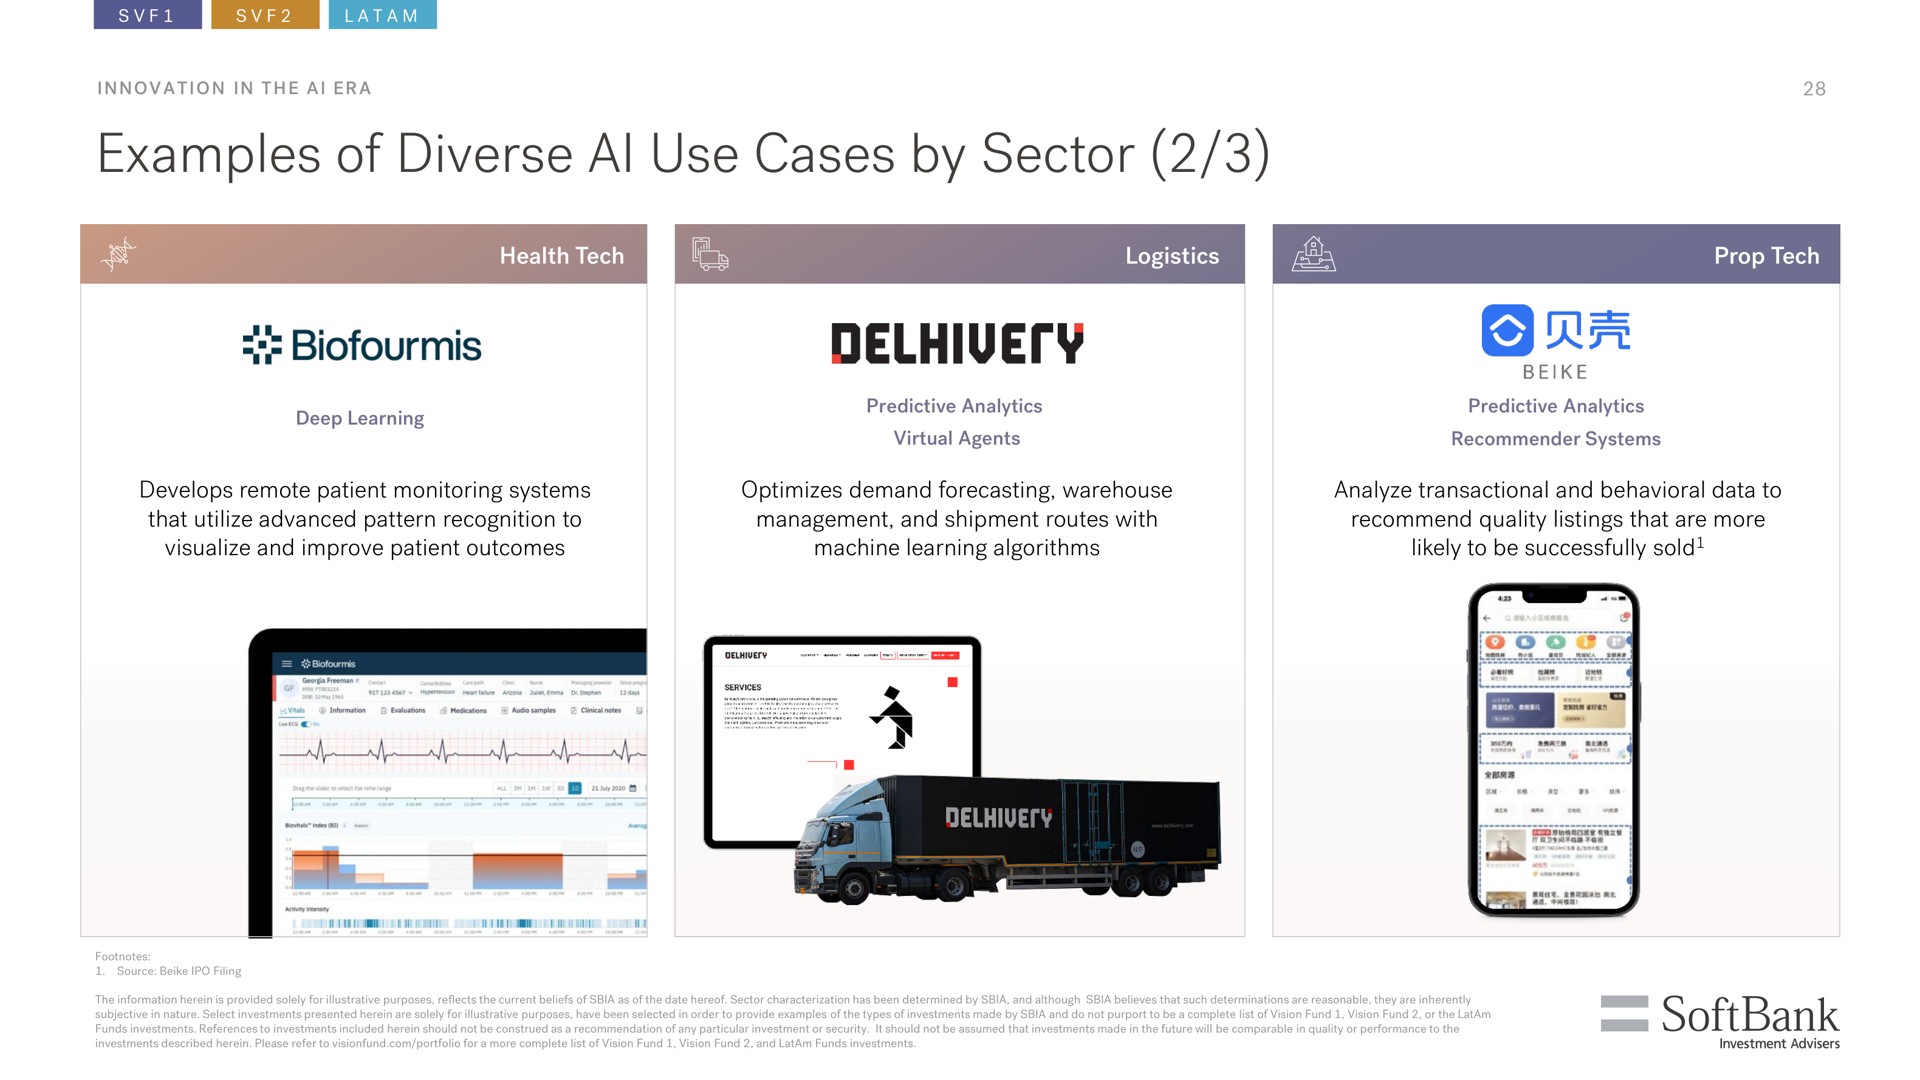 examples of diverse use cases by sector i seep ere | SoftBank